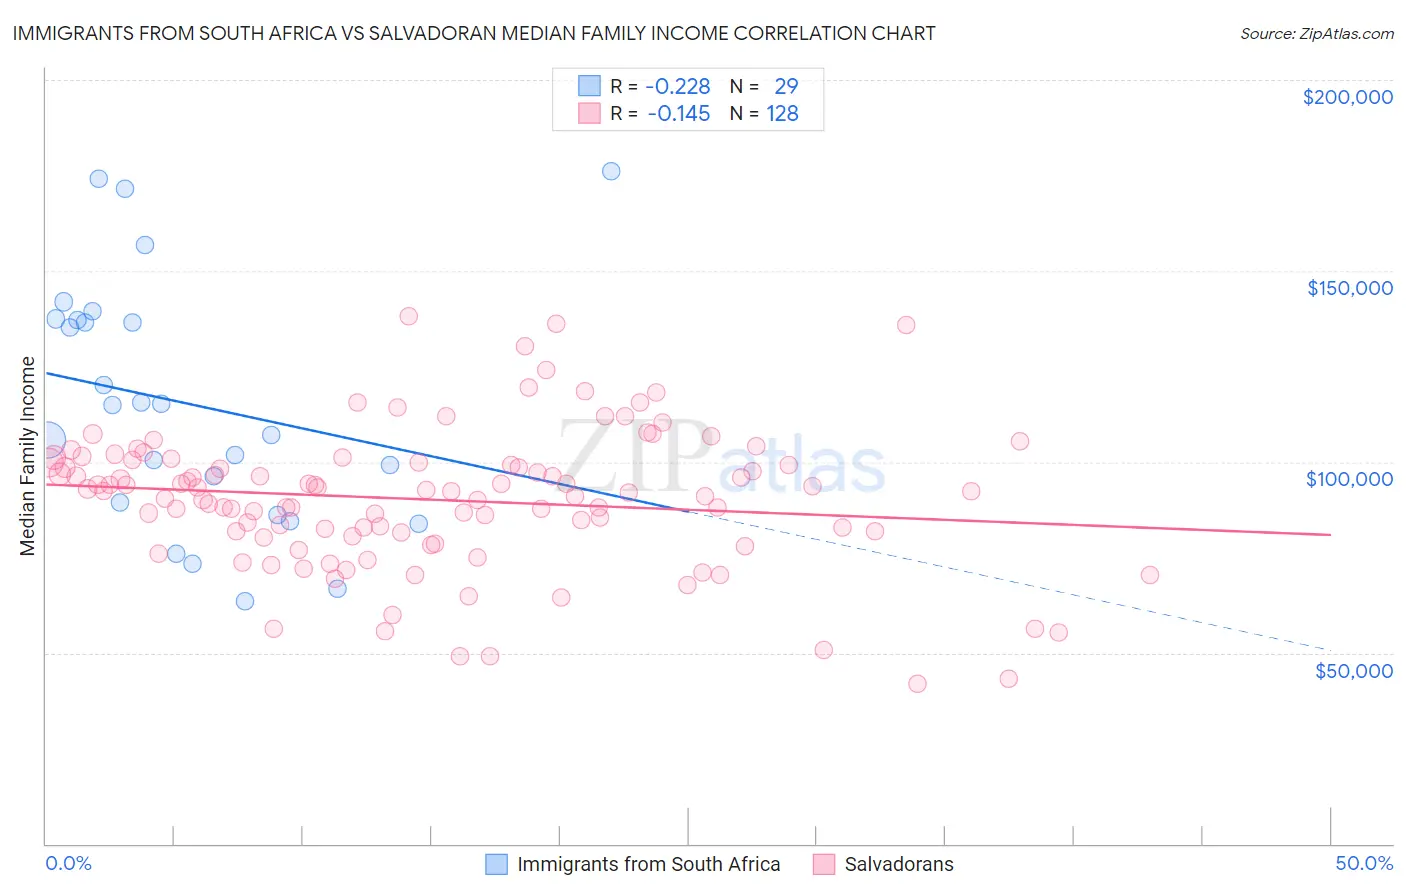 Immigrants from South Africa vs Salvadoran Median Family Income